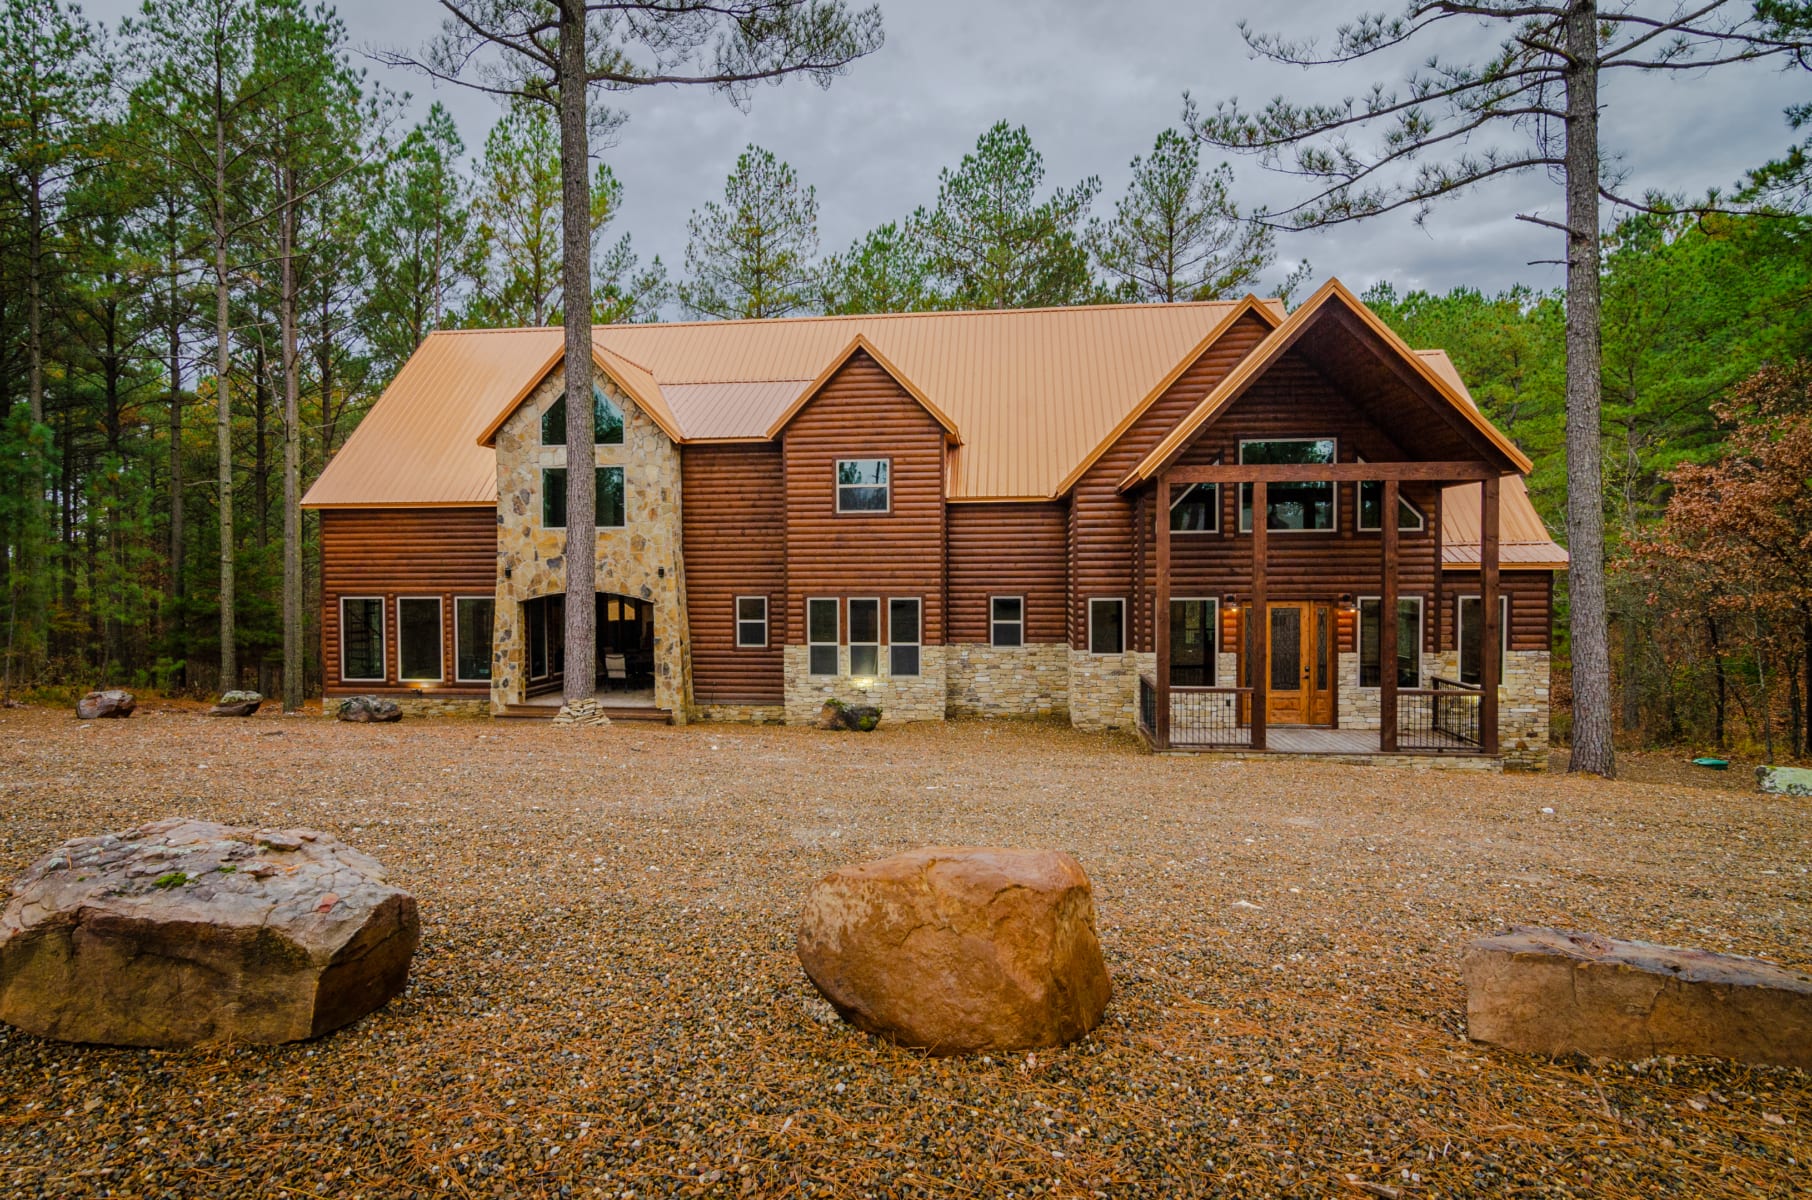 Broken Bow Vacation Cabins Over The Edge 3 Bedroom Accommodates Up To 6 Guests Hot Tub Pet Friendly Wifi Covered Parking